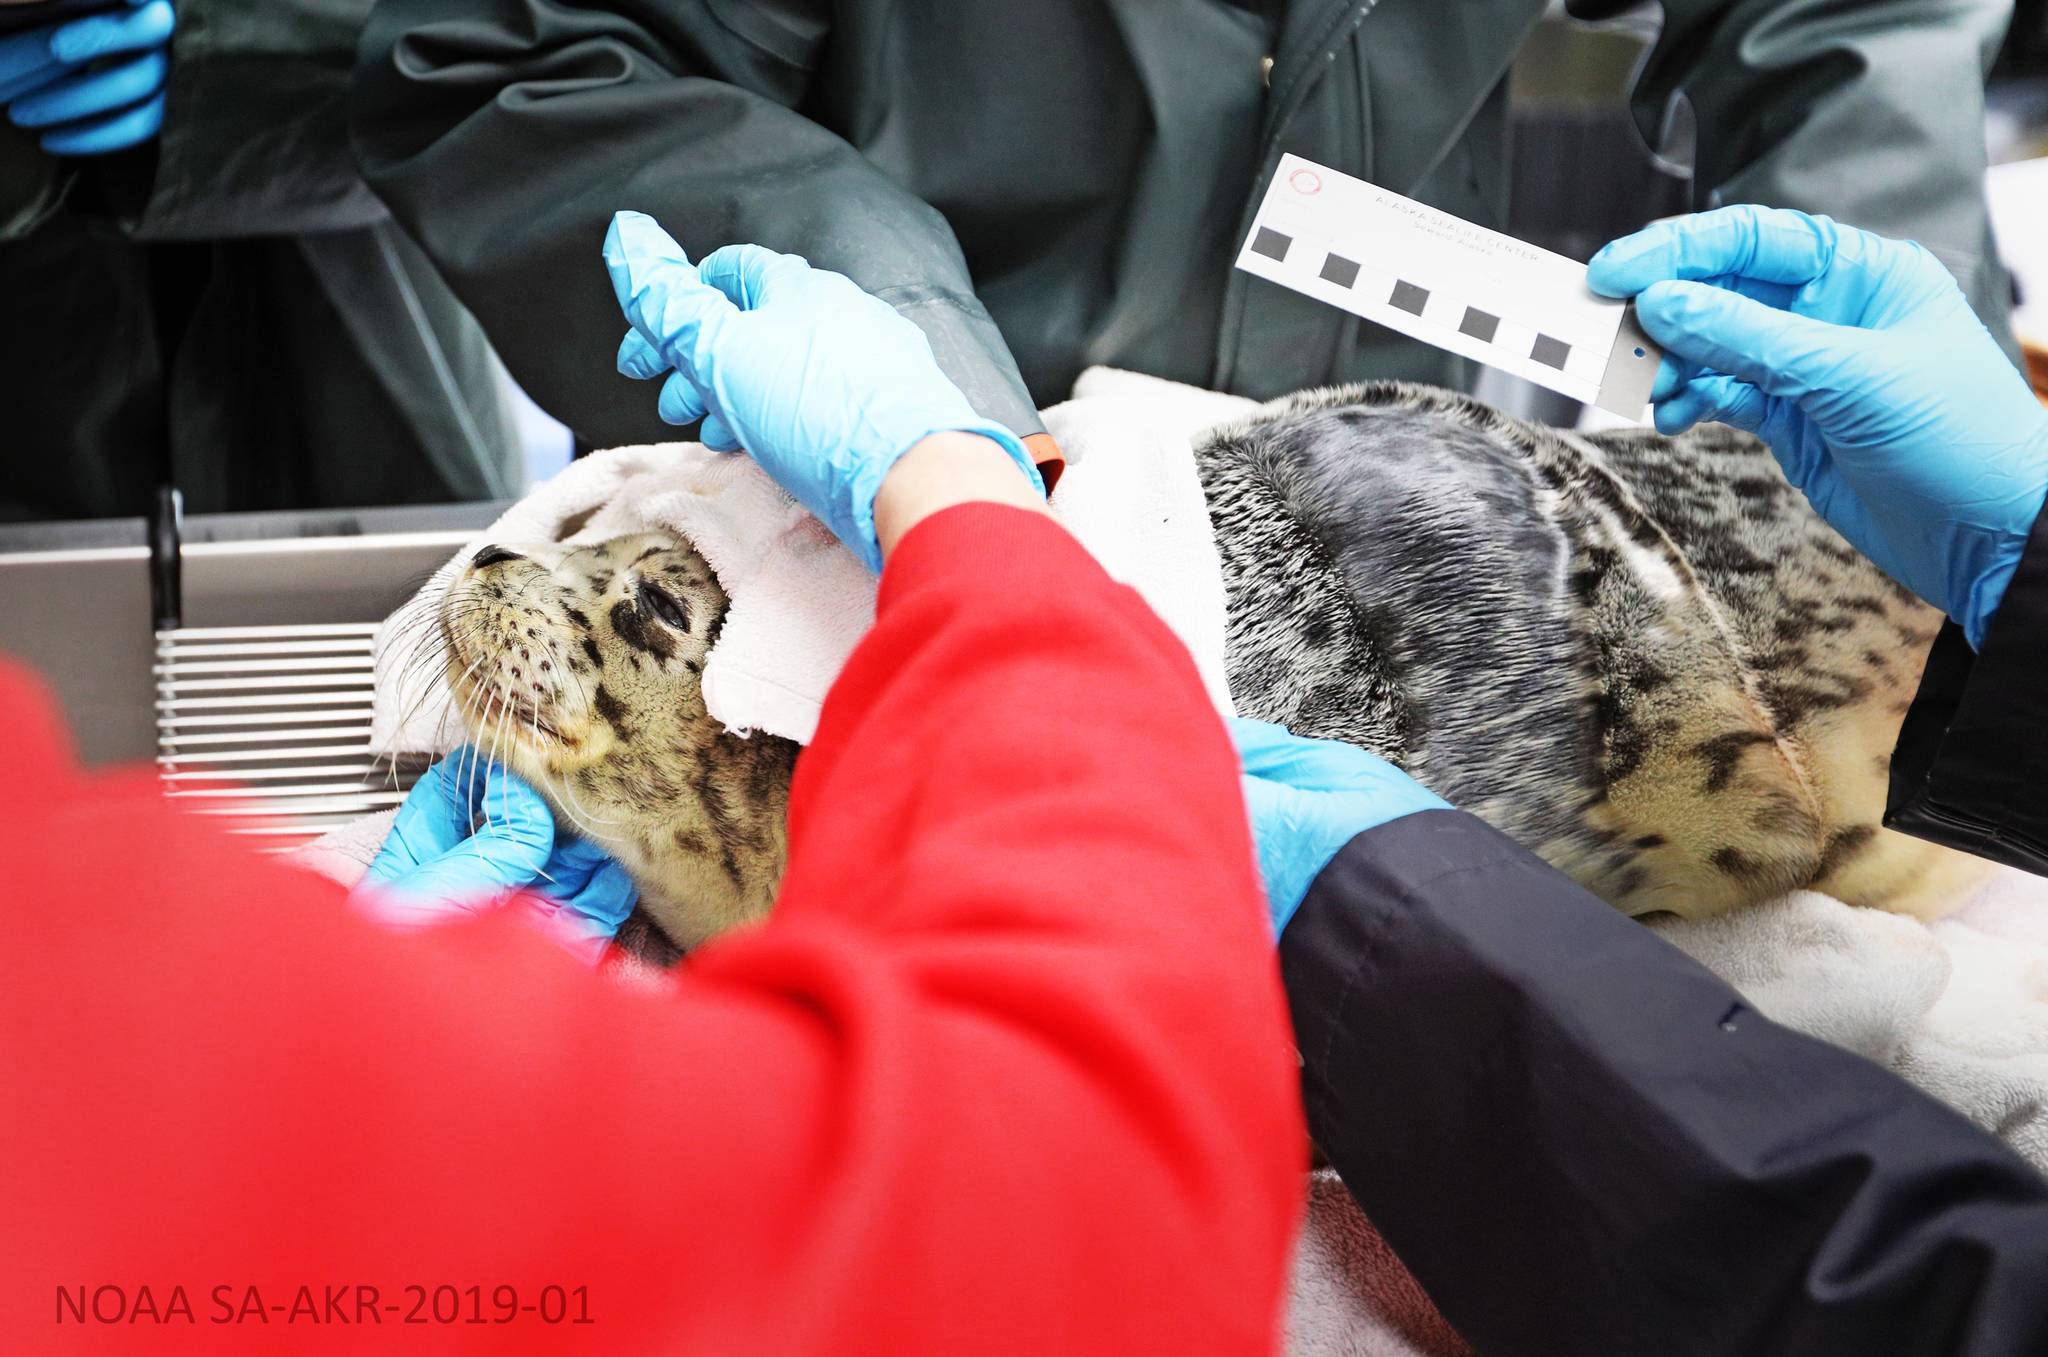 A newborn harbor seal is found and transported to the Alaska SeaLife Center in Seward, Alaska, on Thursday, May 27, 2021. (Photo by the Alaska SeaLife Center)